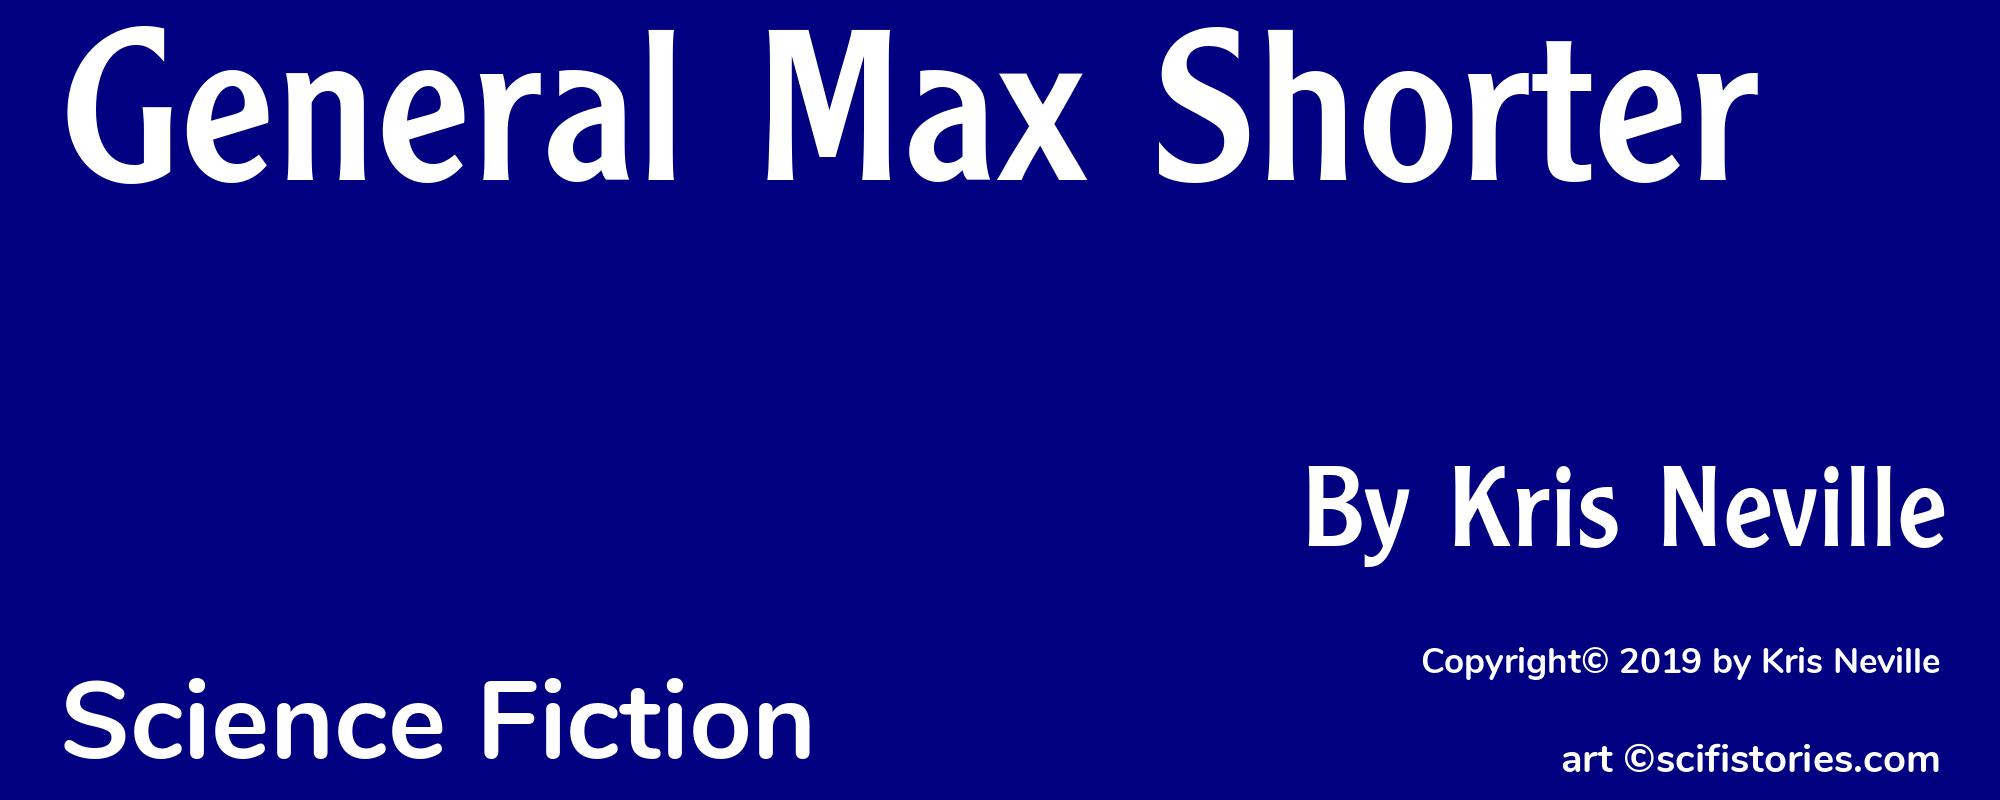 General Max Shorter - Cover